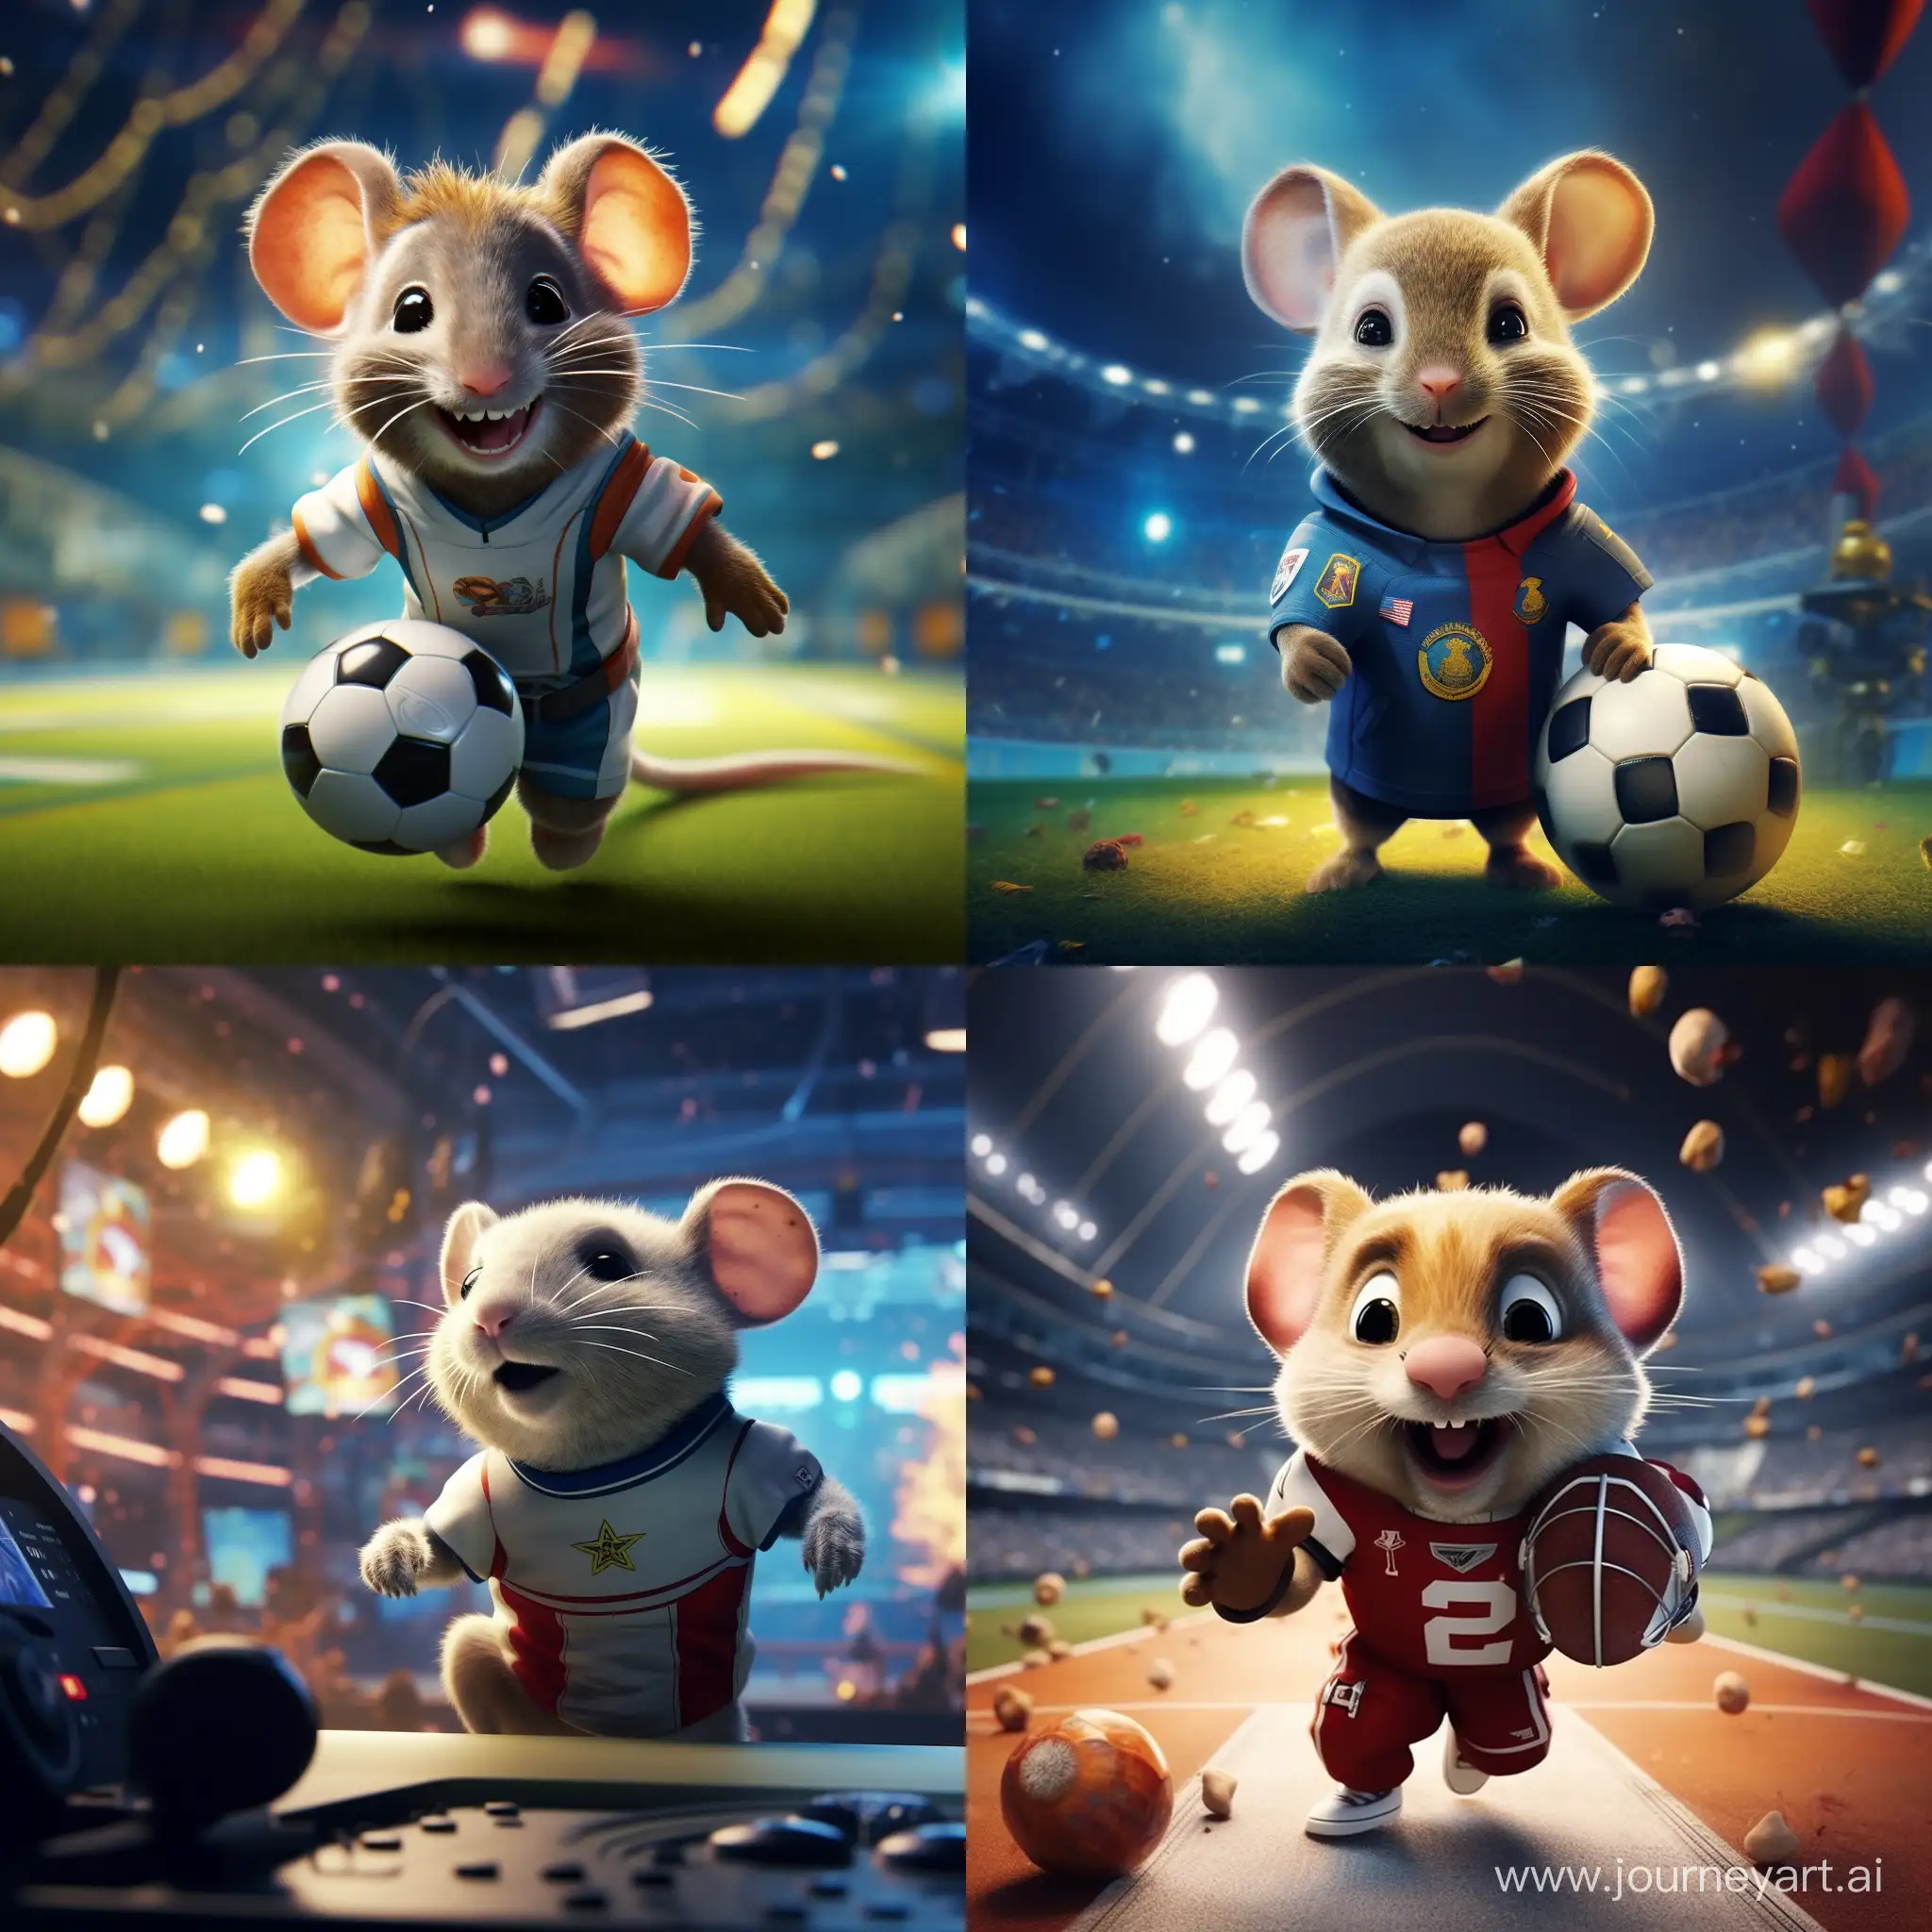 
Imagine a whimsical scenario where a miniature mouse, sporting a tiny football jersey, showcases its soccer prowess on the deck of a futuristic spaceship. Task a text-to-image AI with bringing this charming and unusual scene to life, capturing the essence of a pint-sized football match amid the stars.